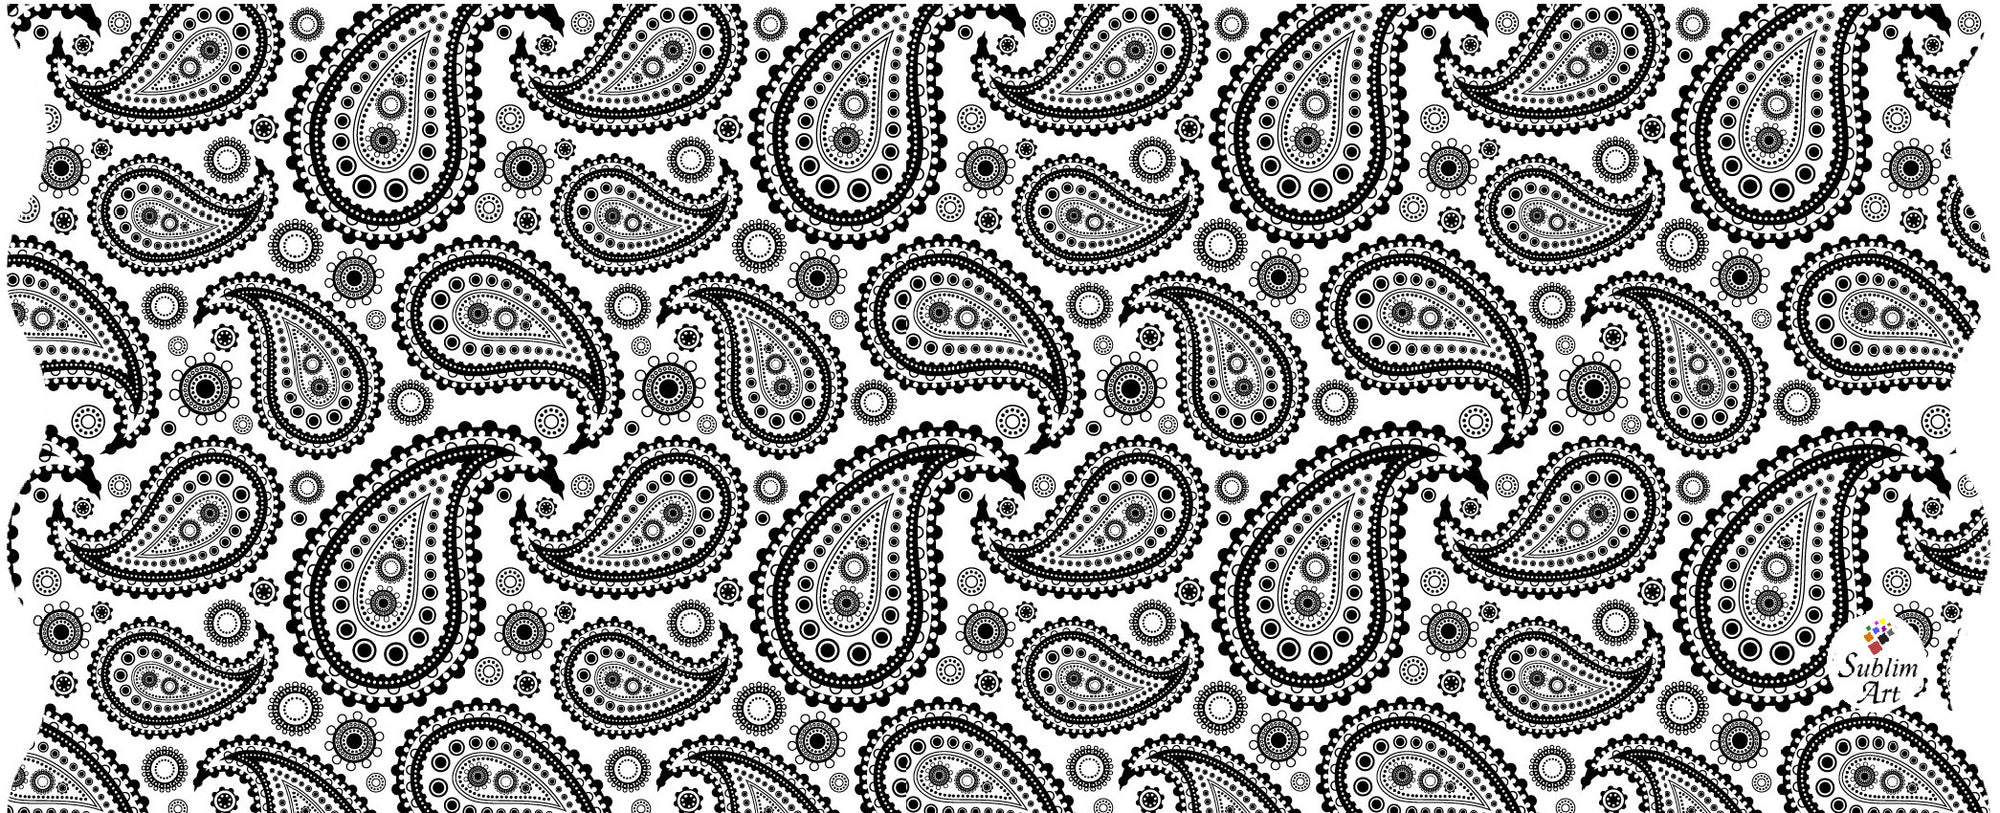 SUBLIMART: B&W Beauty  - Mug featuring a paisley design in black and white - Artistica.com